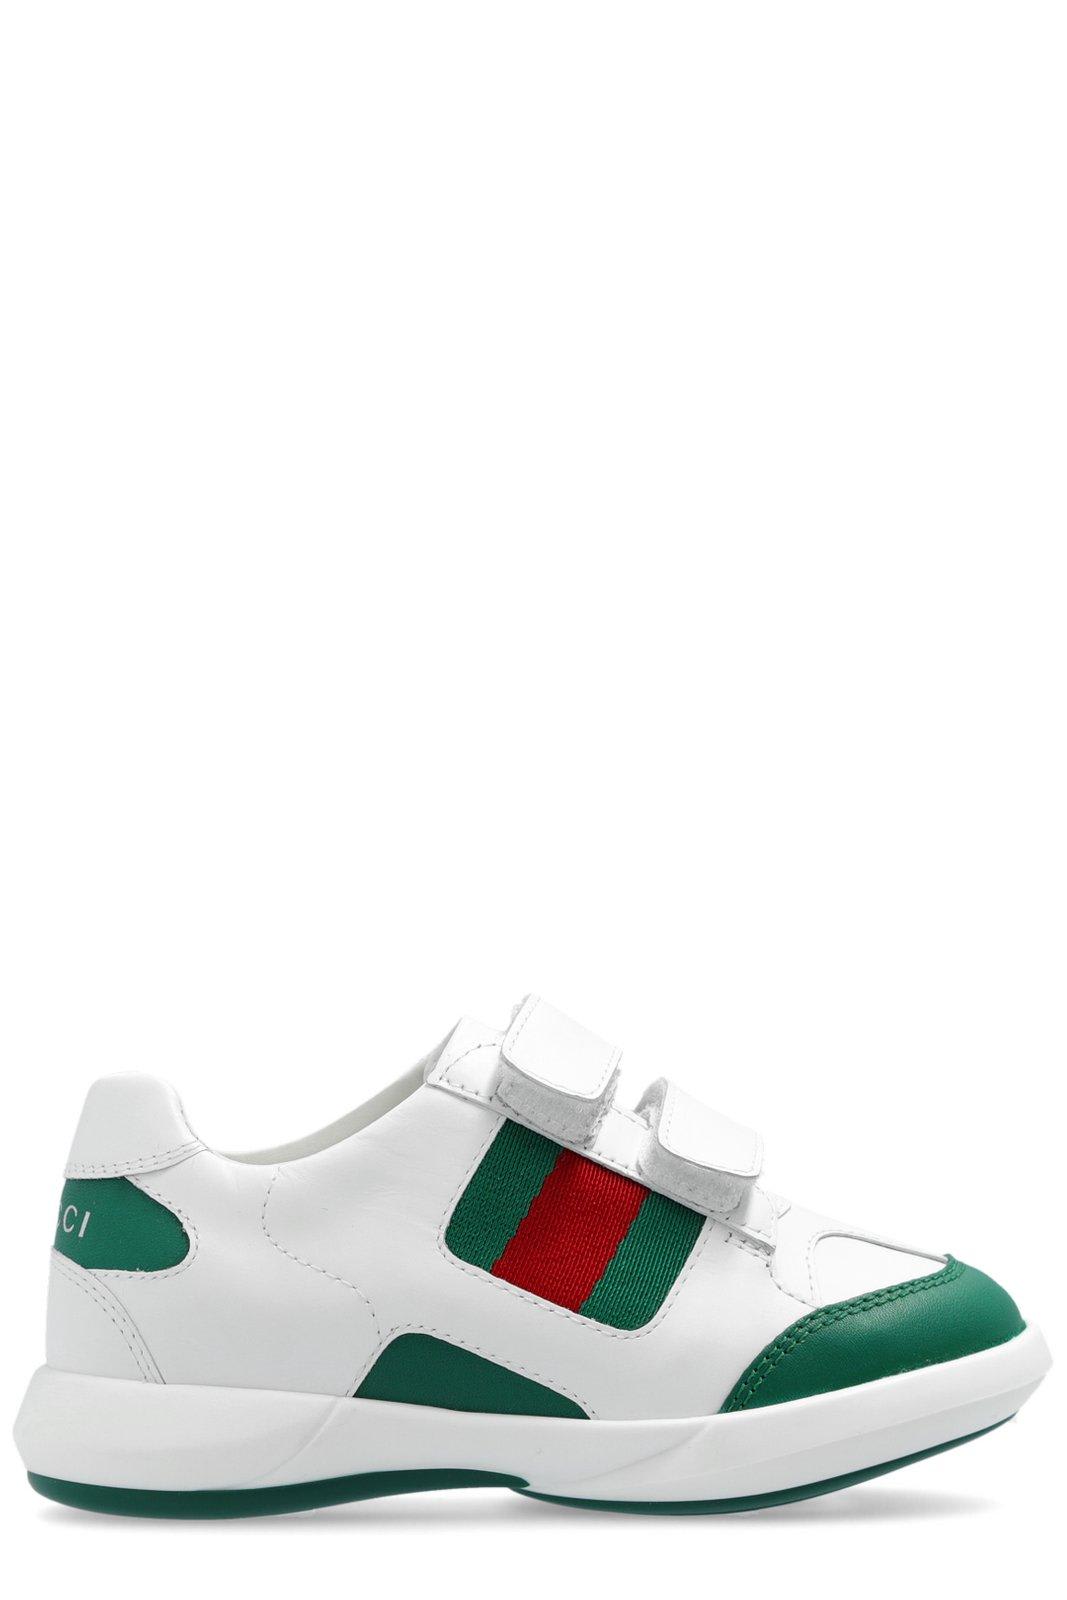 Gucci Toddler Web Sneakers